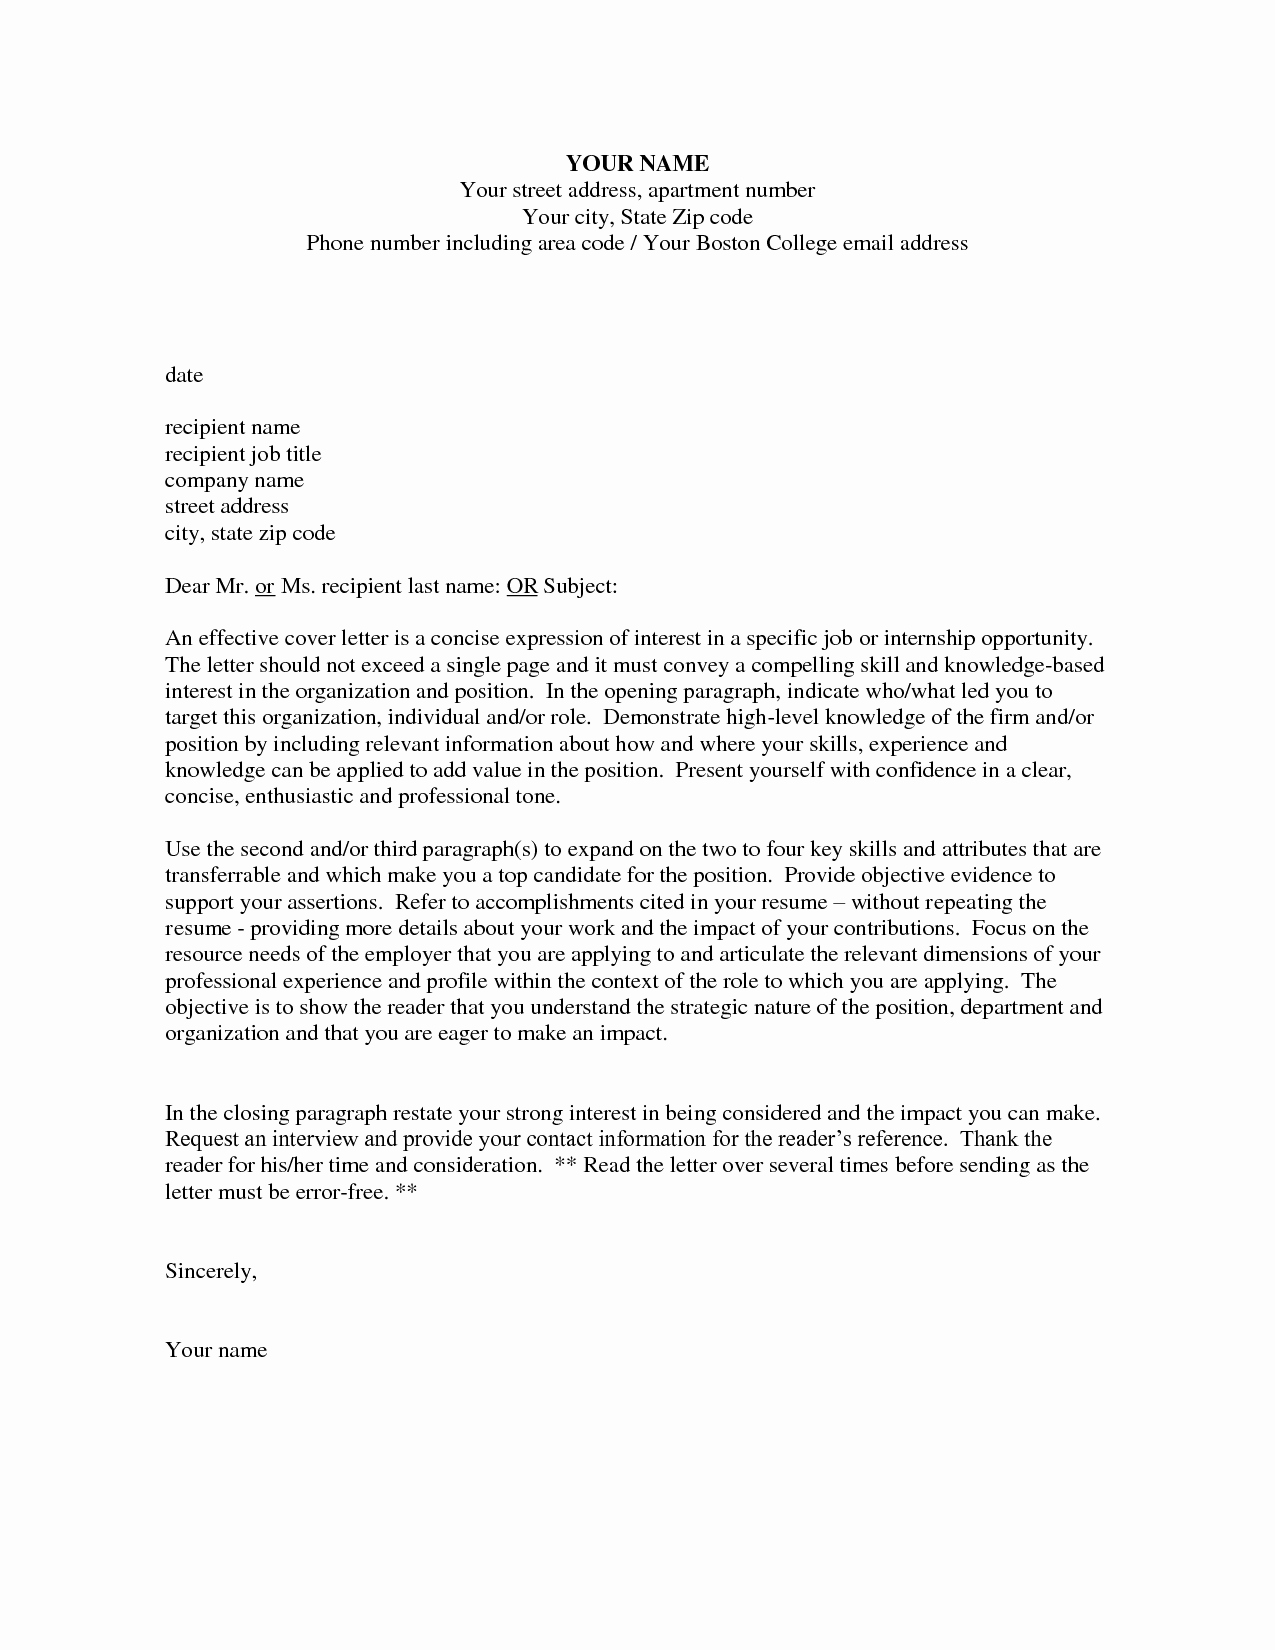 Example Of Letter Of Interest Best Of How to Write A Cover Letter Of Interest Example for A Job